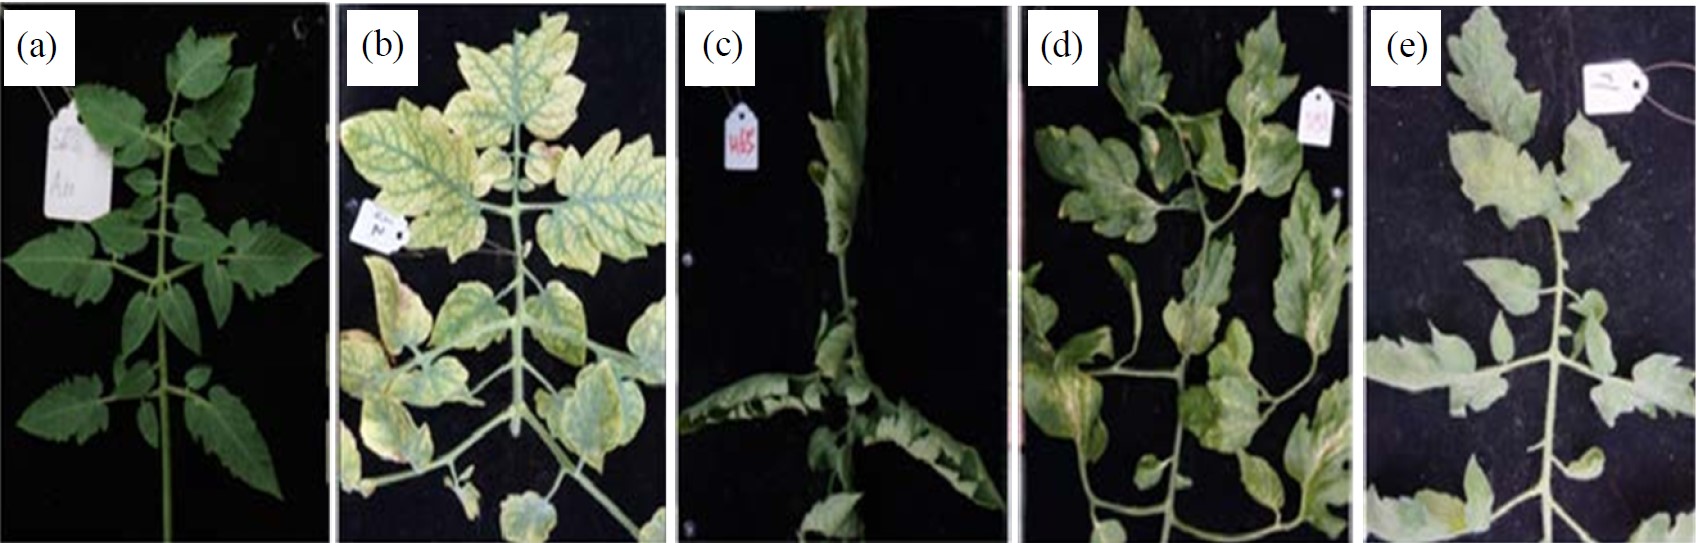 Image for - Investigation of Tomato chlorosis virus Infection in Tomato Growth Facilities in Shanghai, China